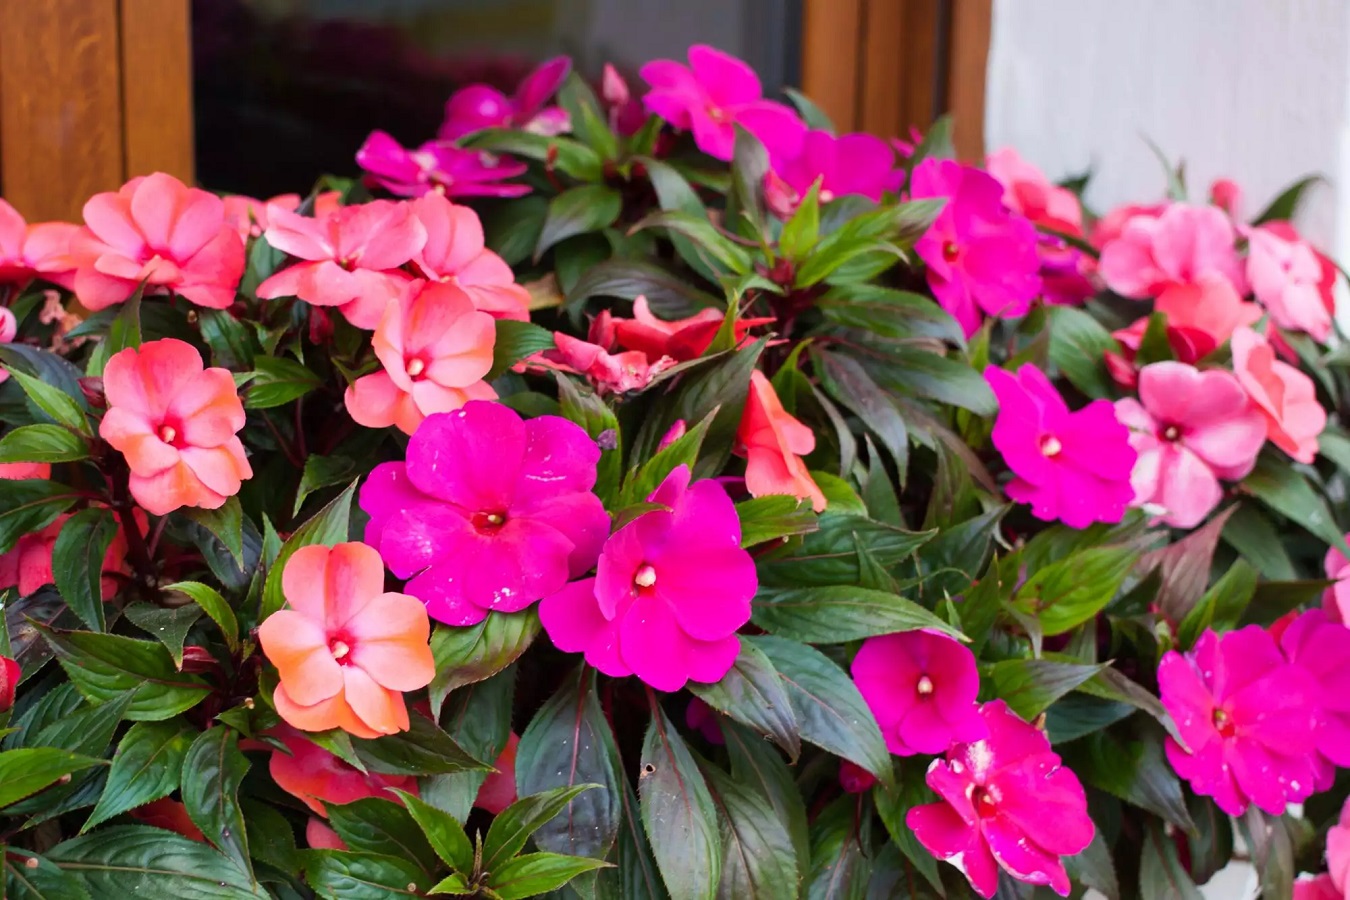 Impatiens Care Guide - Varieties, Colors, Requirements of the Plant